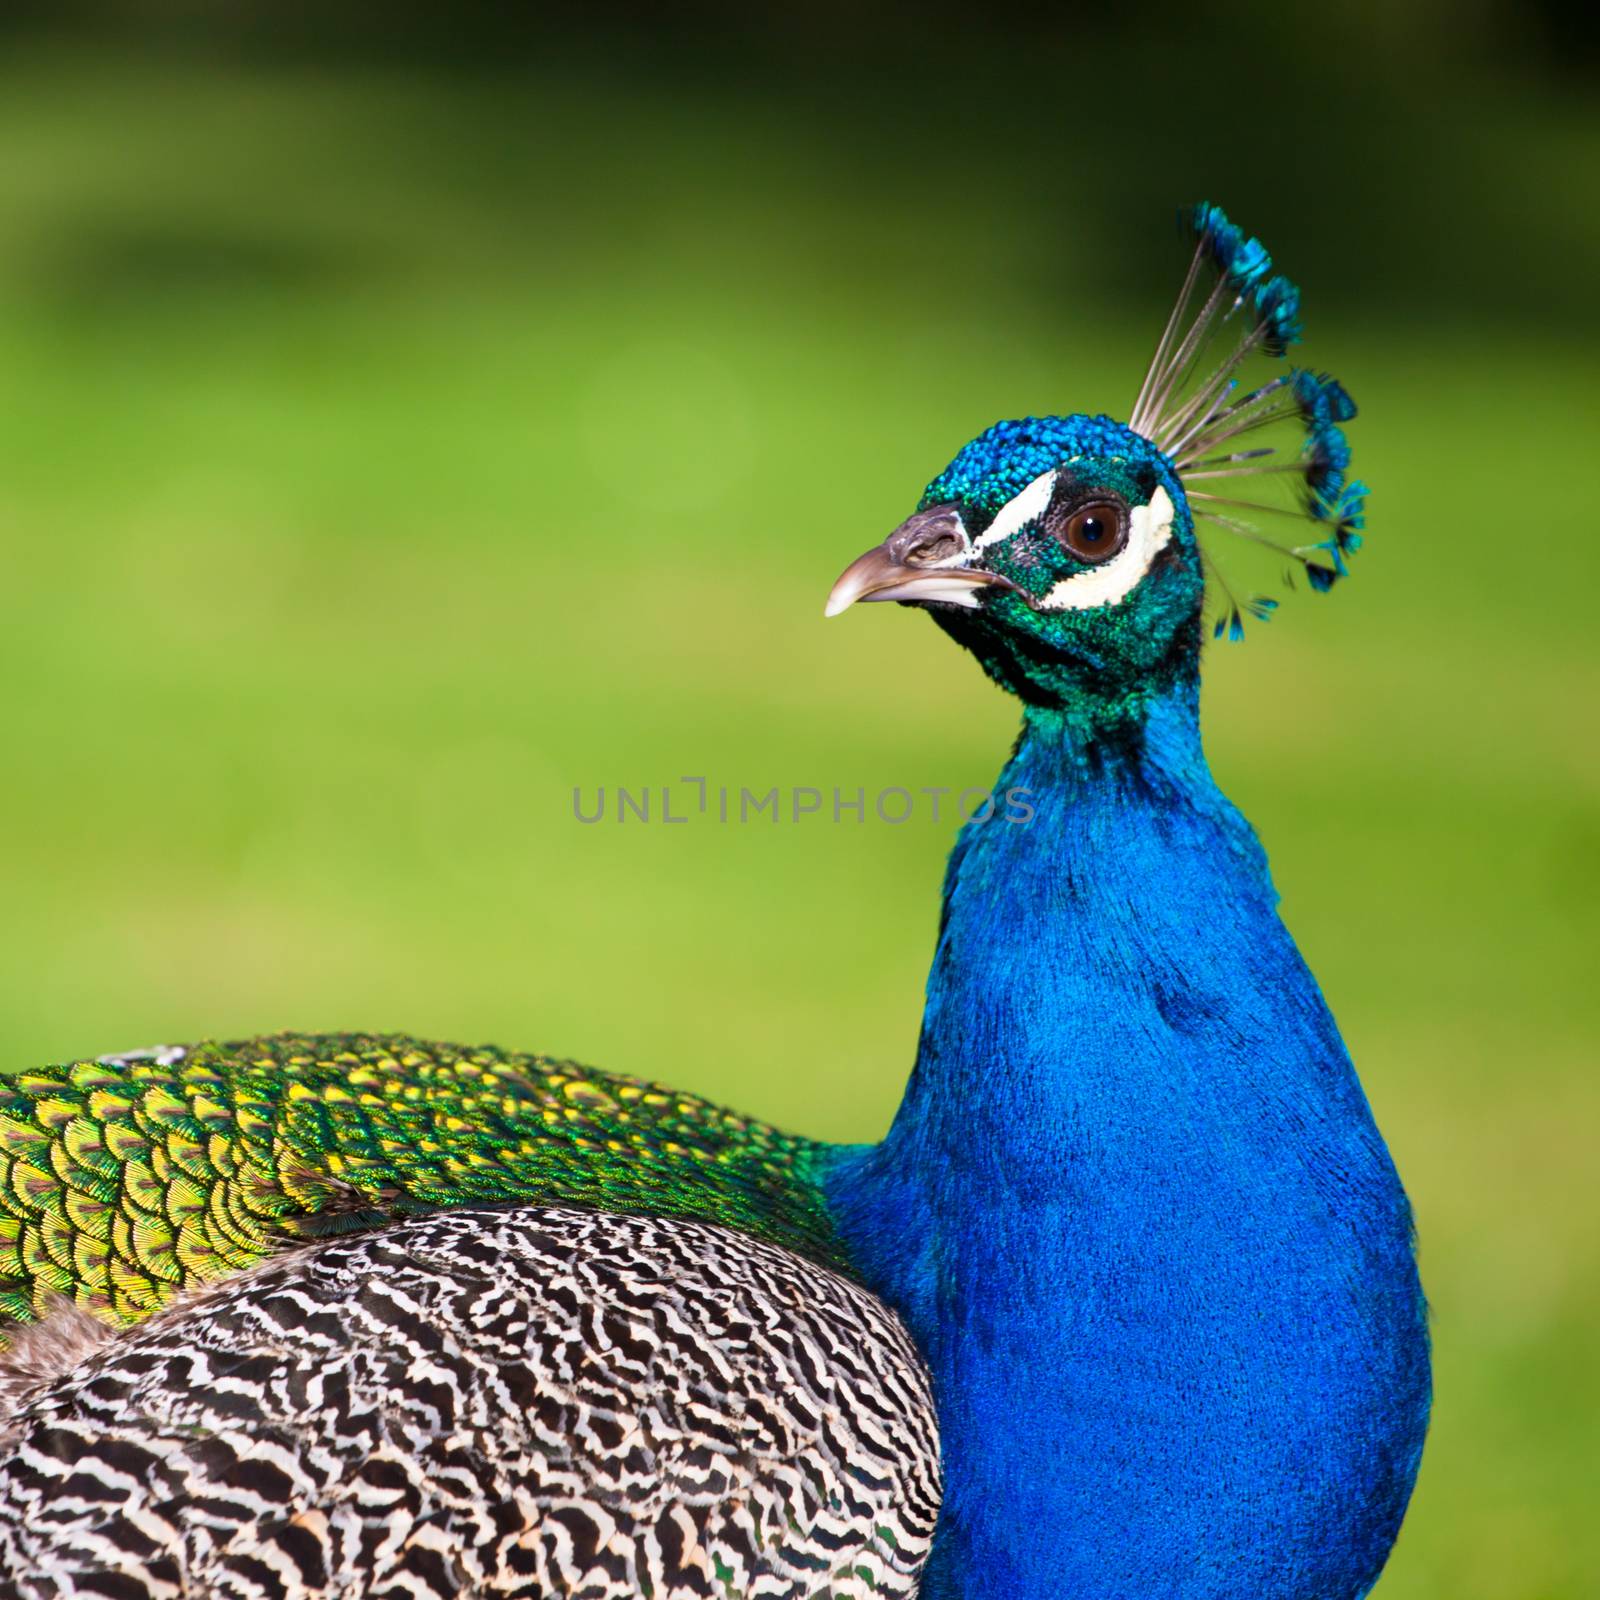 Peacock showing his majestic tail during the mating season.